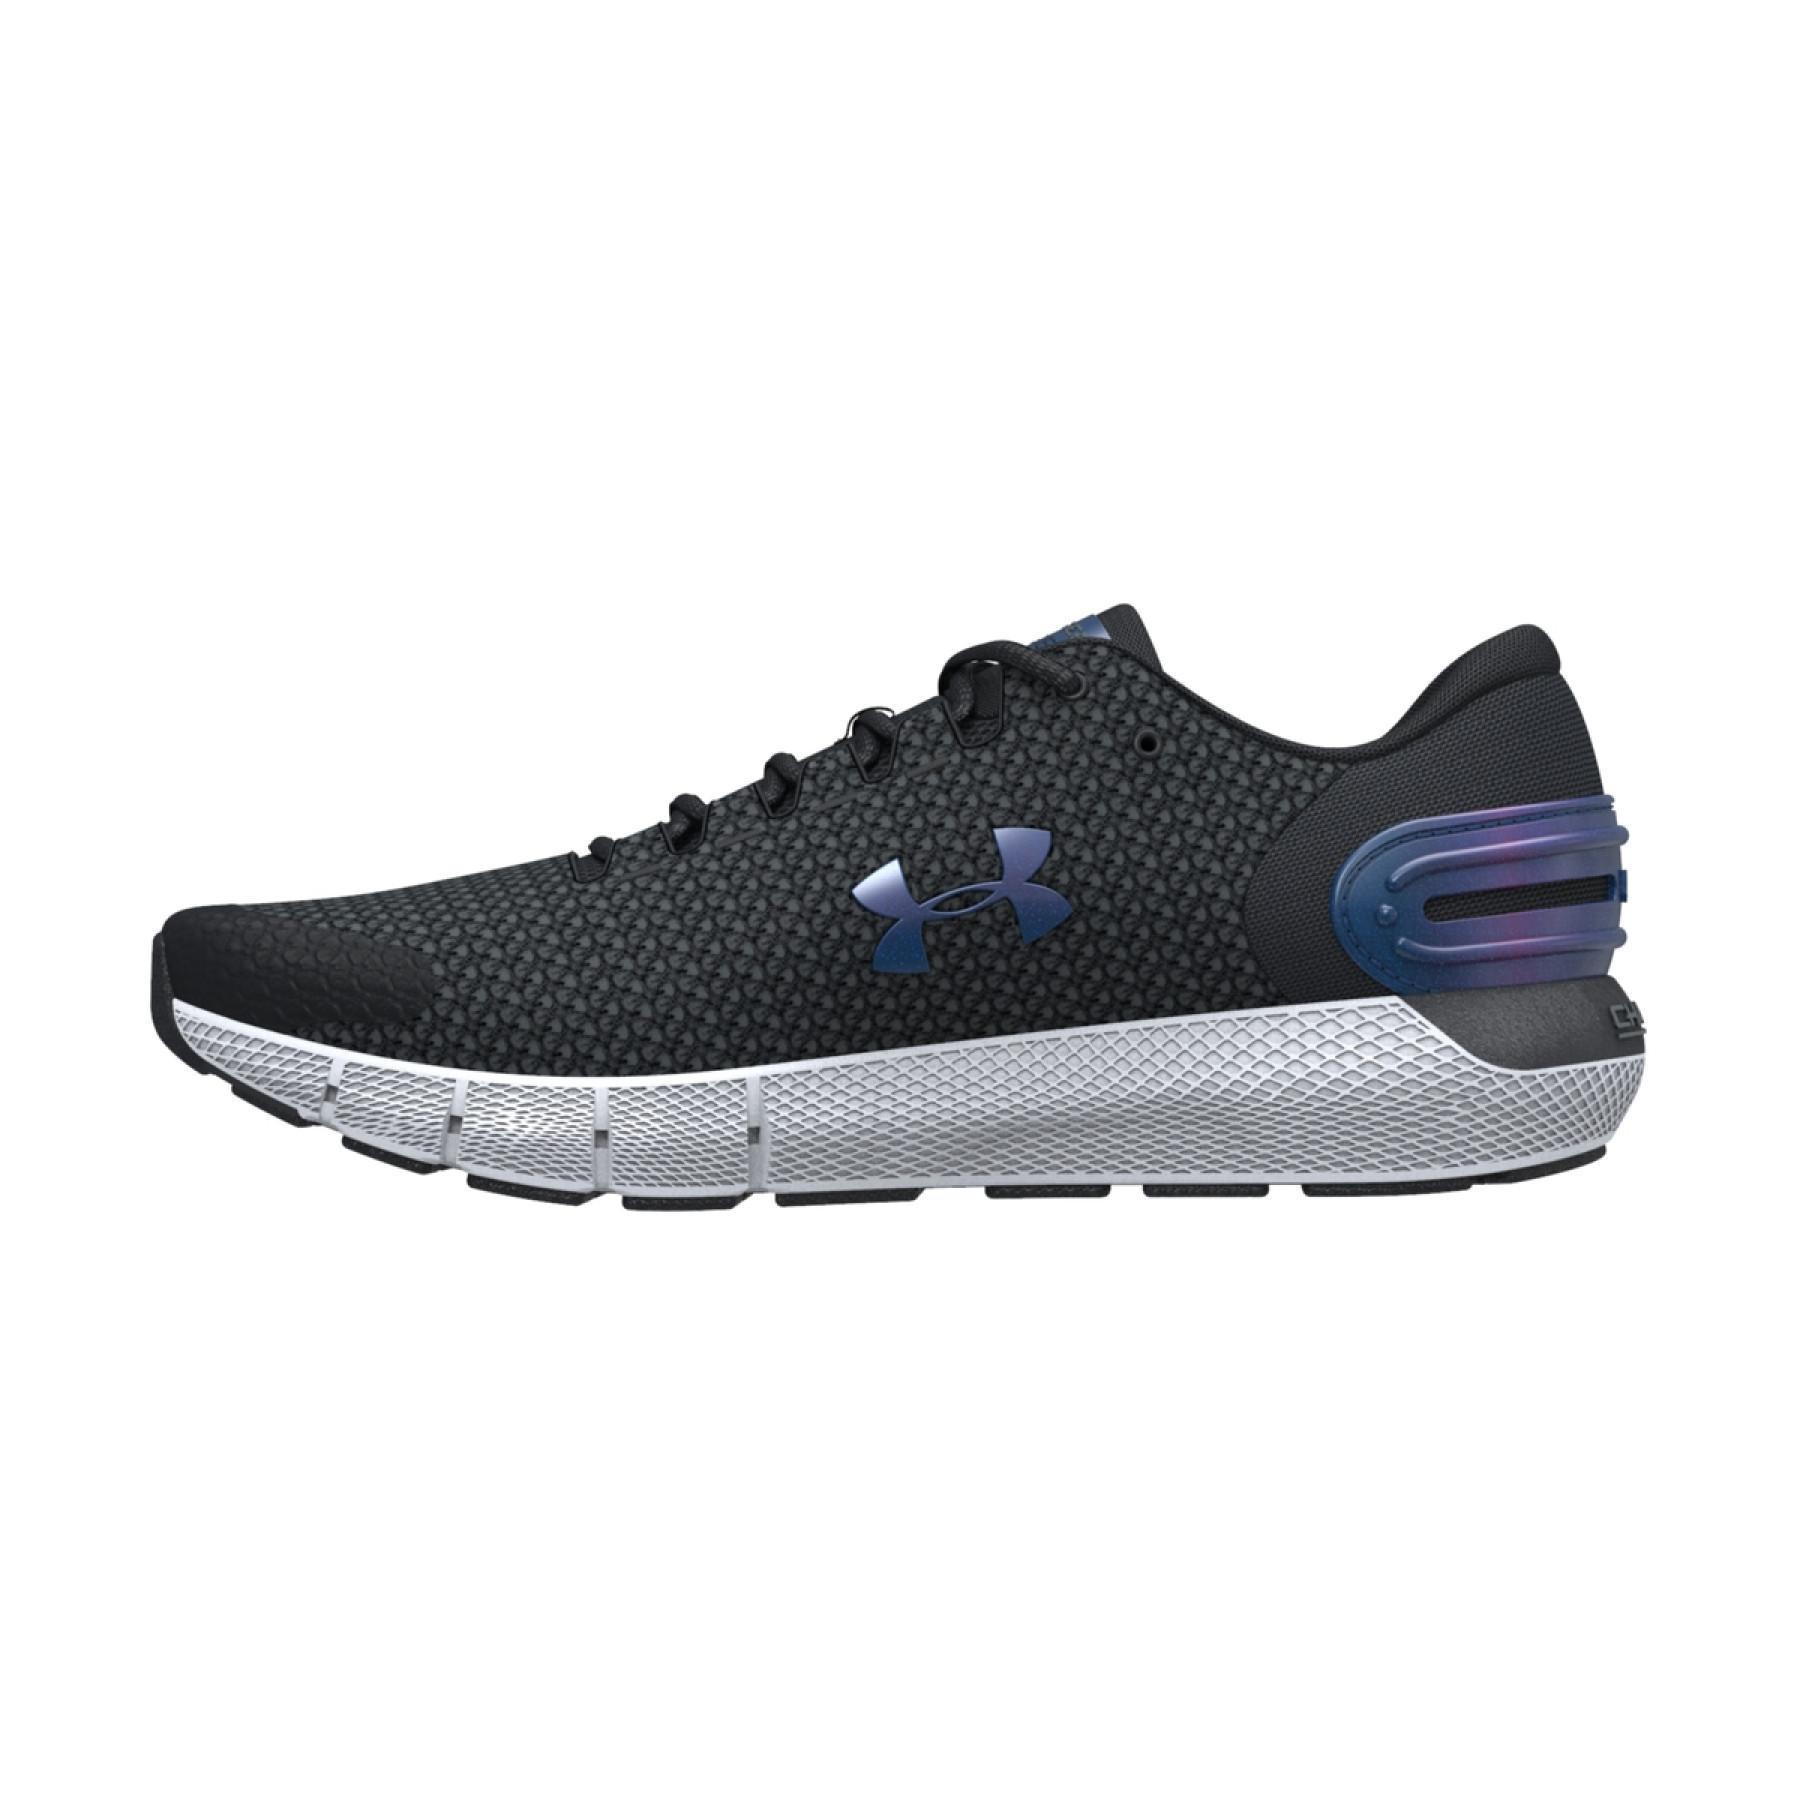 Zapatillas de running para mujer Under Armour Charged Rogue 2.5 Colorshift